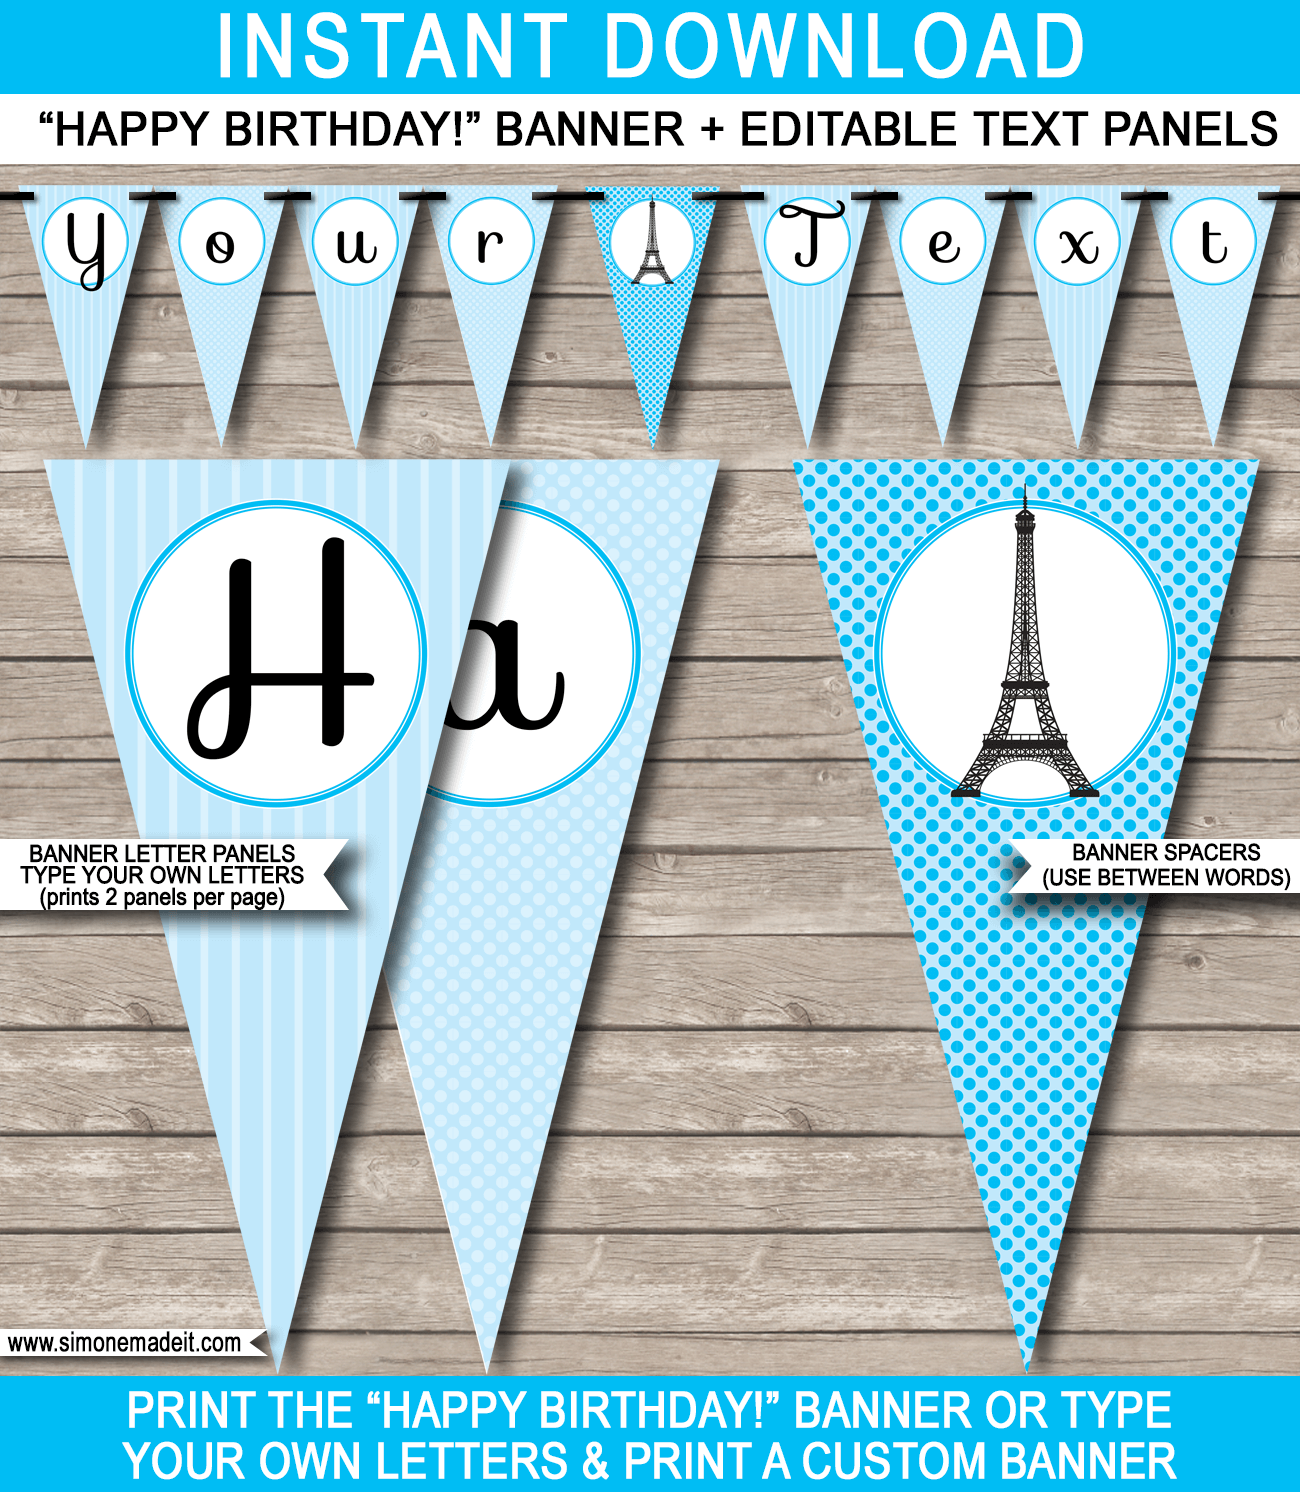 Blue Paris Party Banner Template - Happy Birthday Bunting Pennants - Editable and Printable DIY Template - INSTANT DOWNLOAD $4.50 via simonemadeit.com